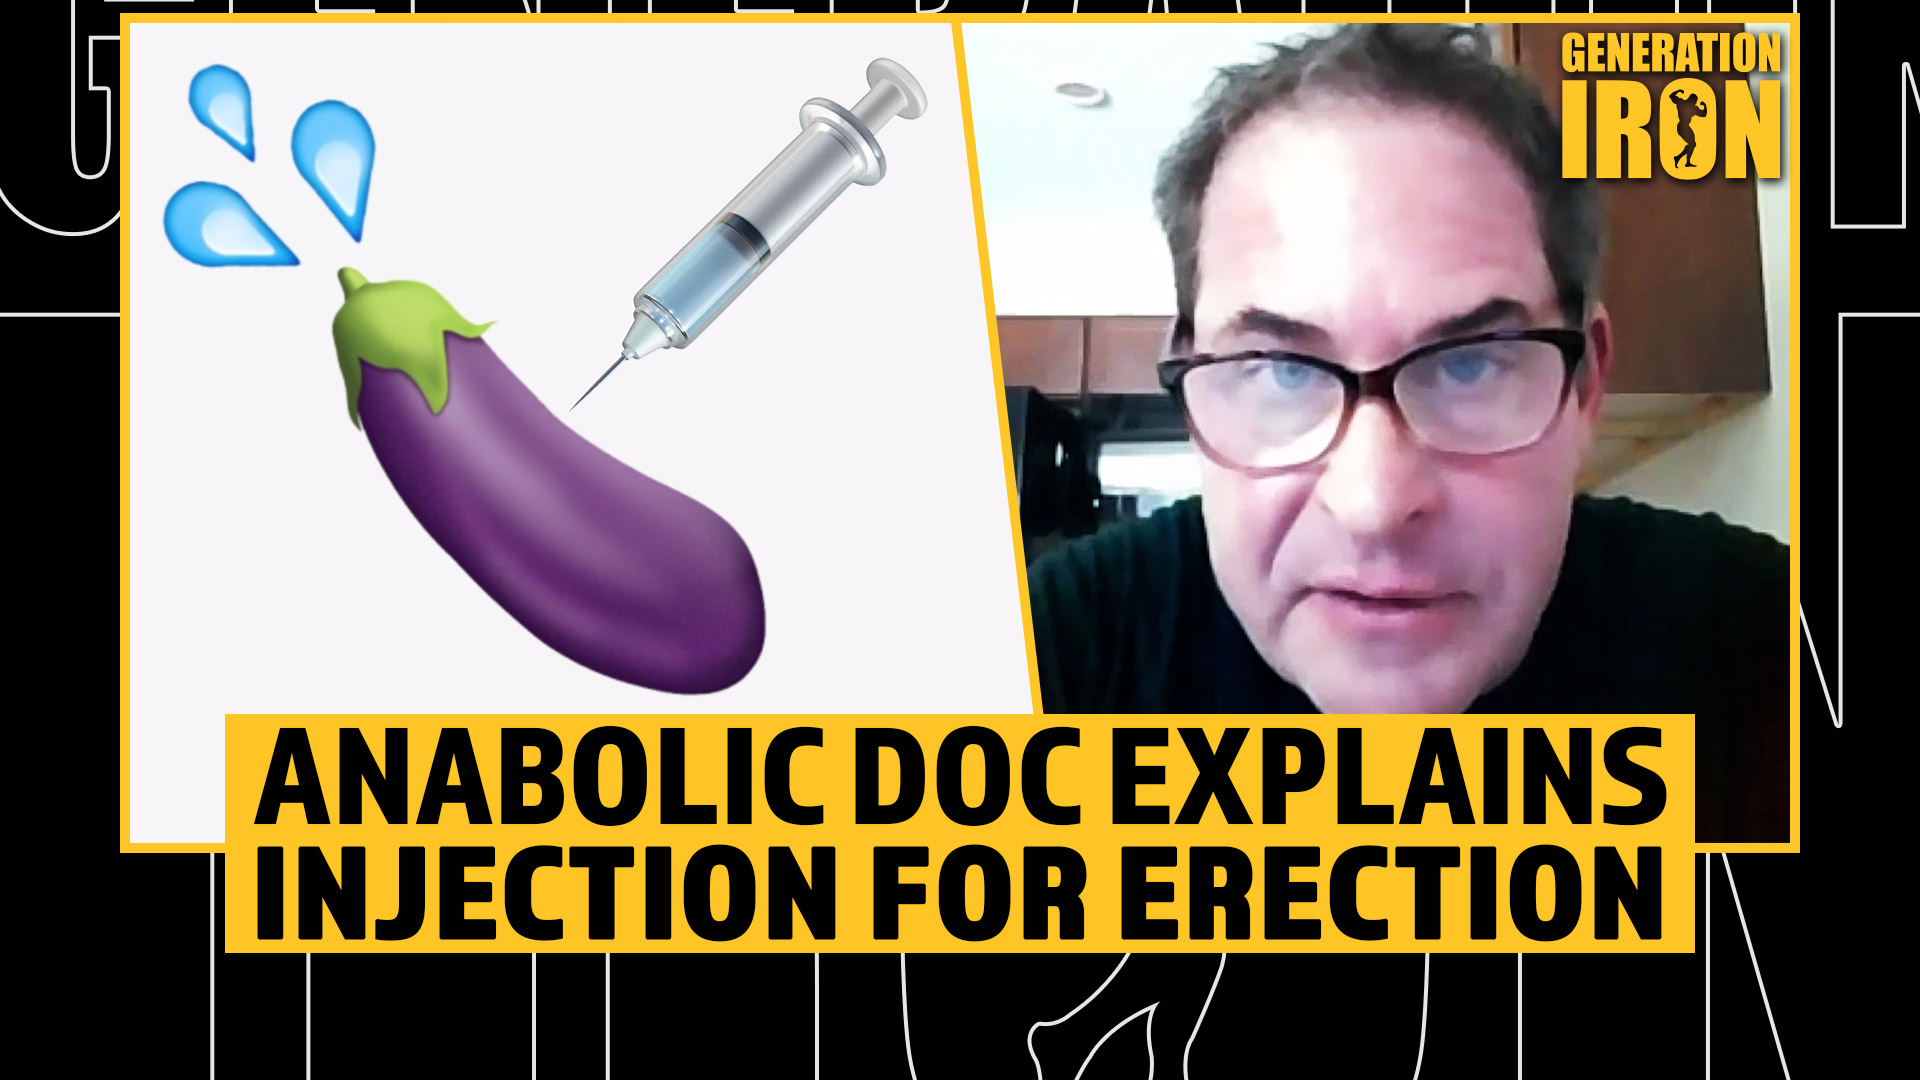 The Anabolic Doc Explains ‘Injection For An Erection’